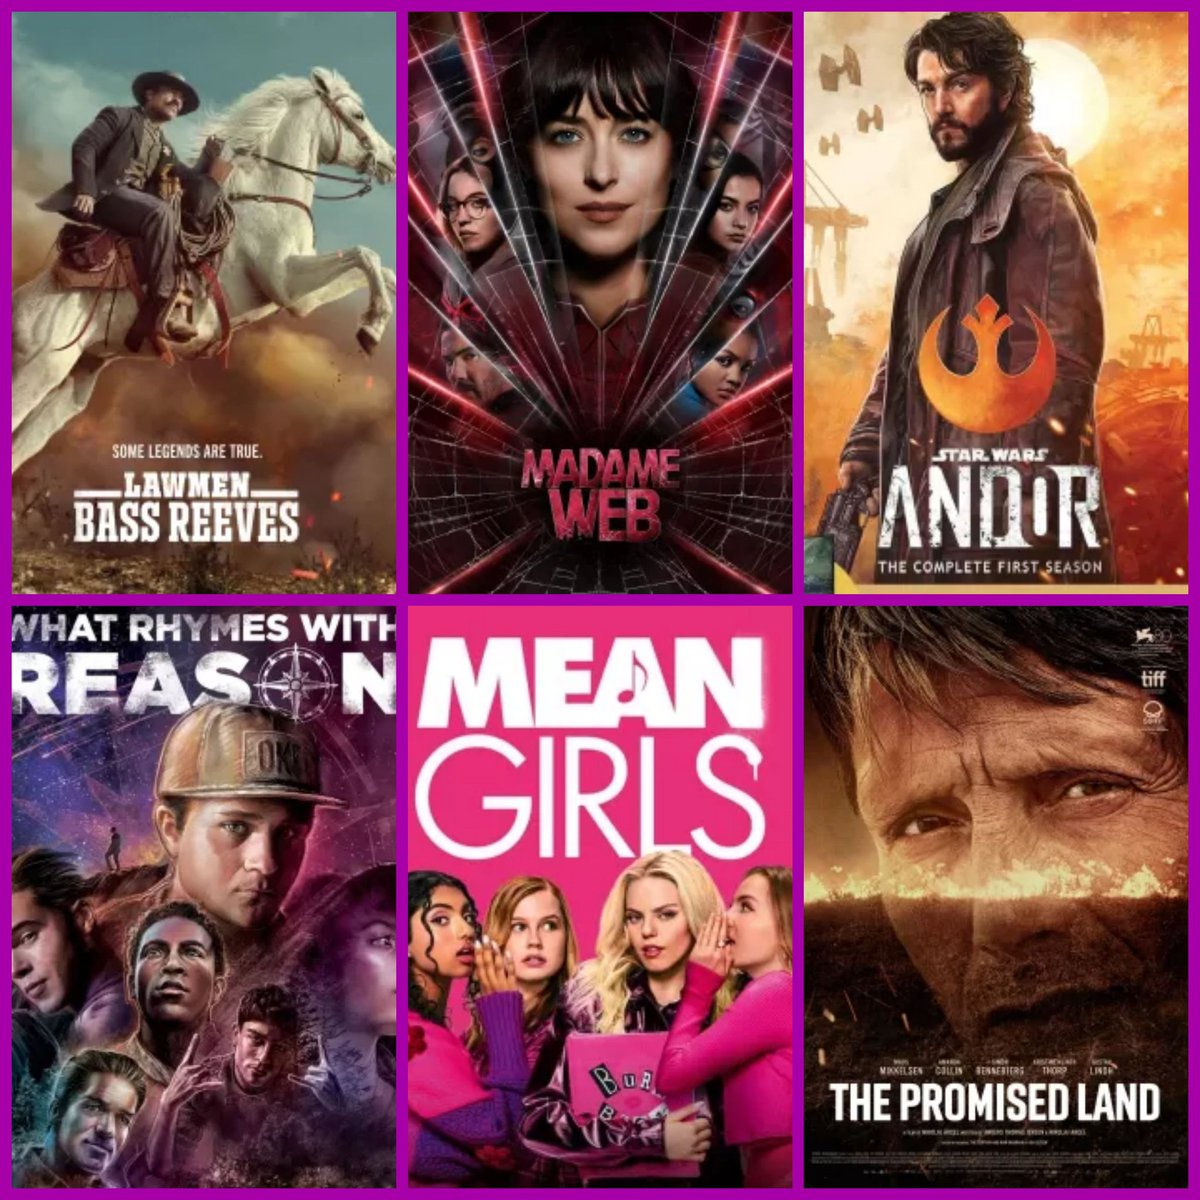 OUT NOW! New Movies!!
🎬🍿🤩😍🎬🍿🤩😍🎬🍿🤩😍🎬🍿
#reelhollywoodvideo #outnow #NewReleaseTuesday #newreleases  #movienight🎬 #wegotyoucovered #cozynights #local #entertainment #movies #familyfun #datenight #weekendplans #rhvmac #mcminnville #oregon #supportlocalbusiness